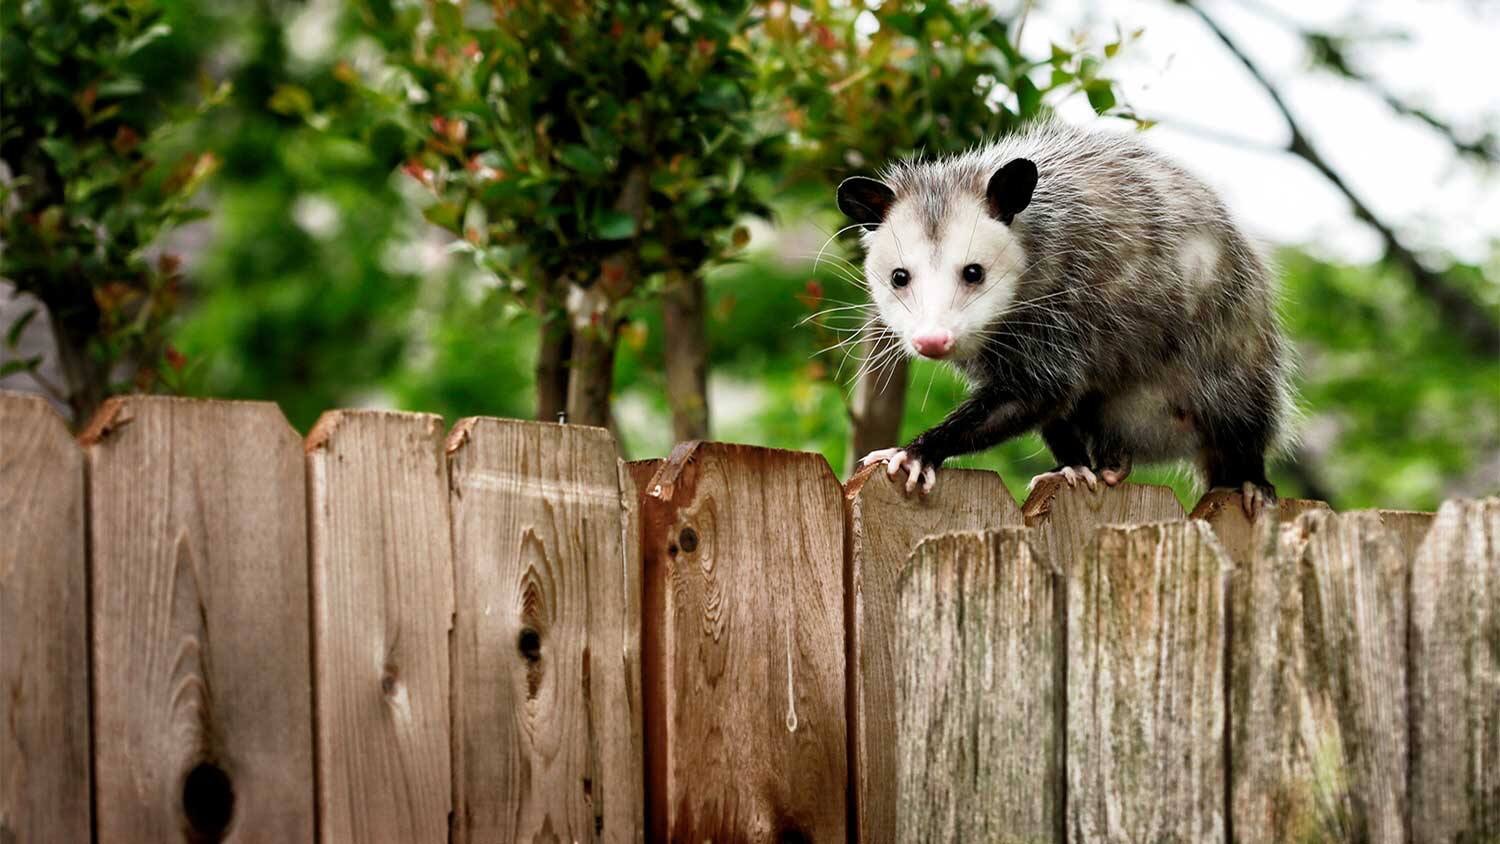 How To Get Rid Of Possums In Your Attic